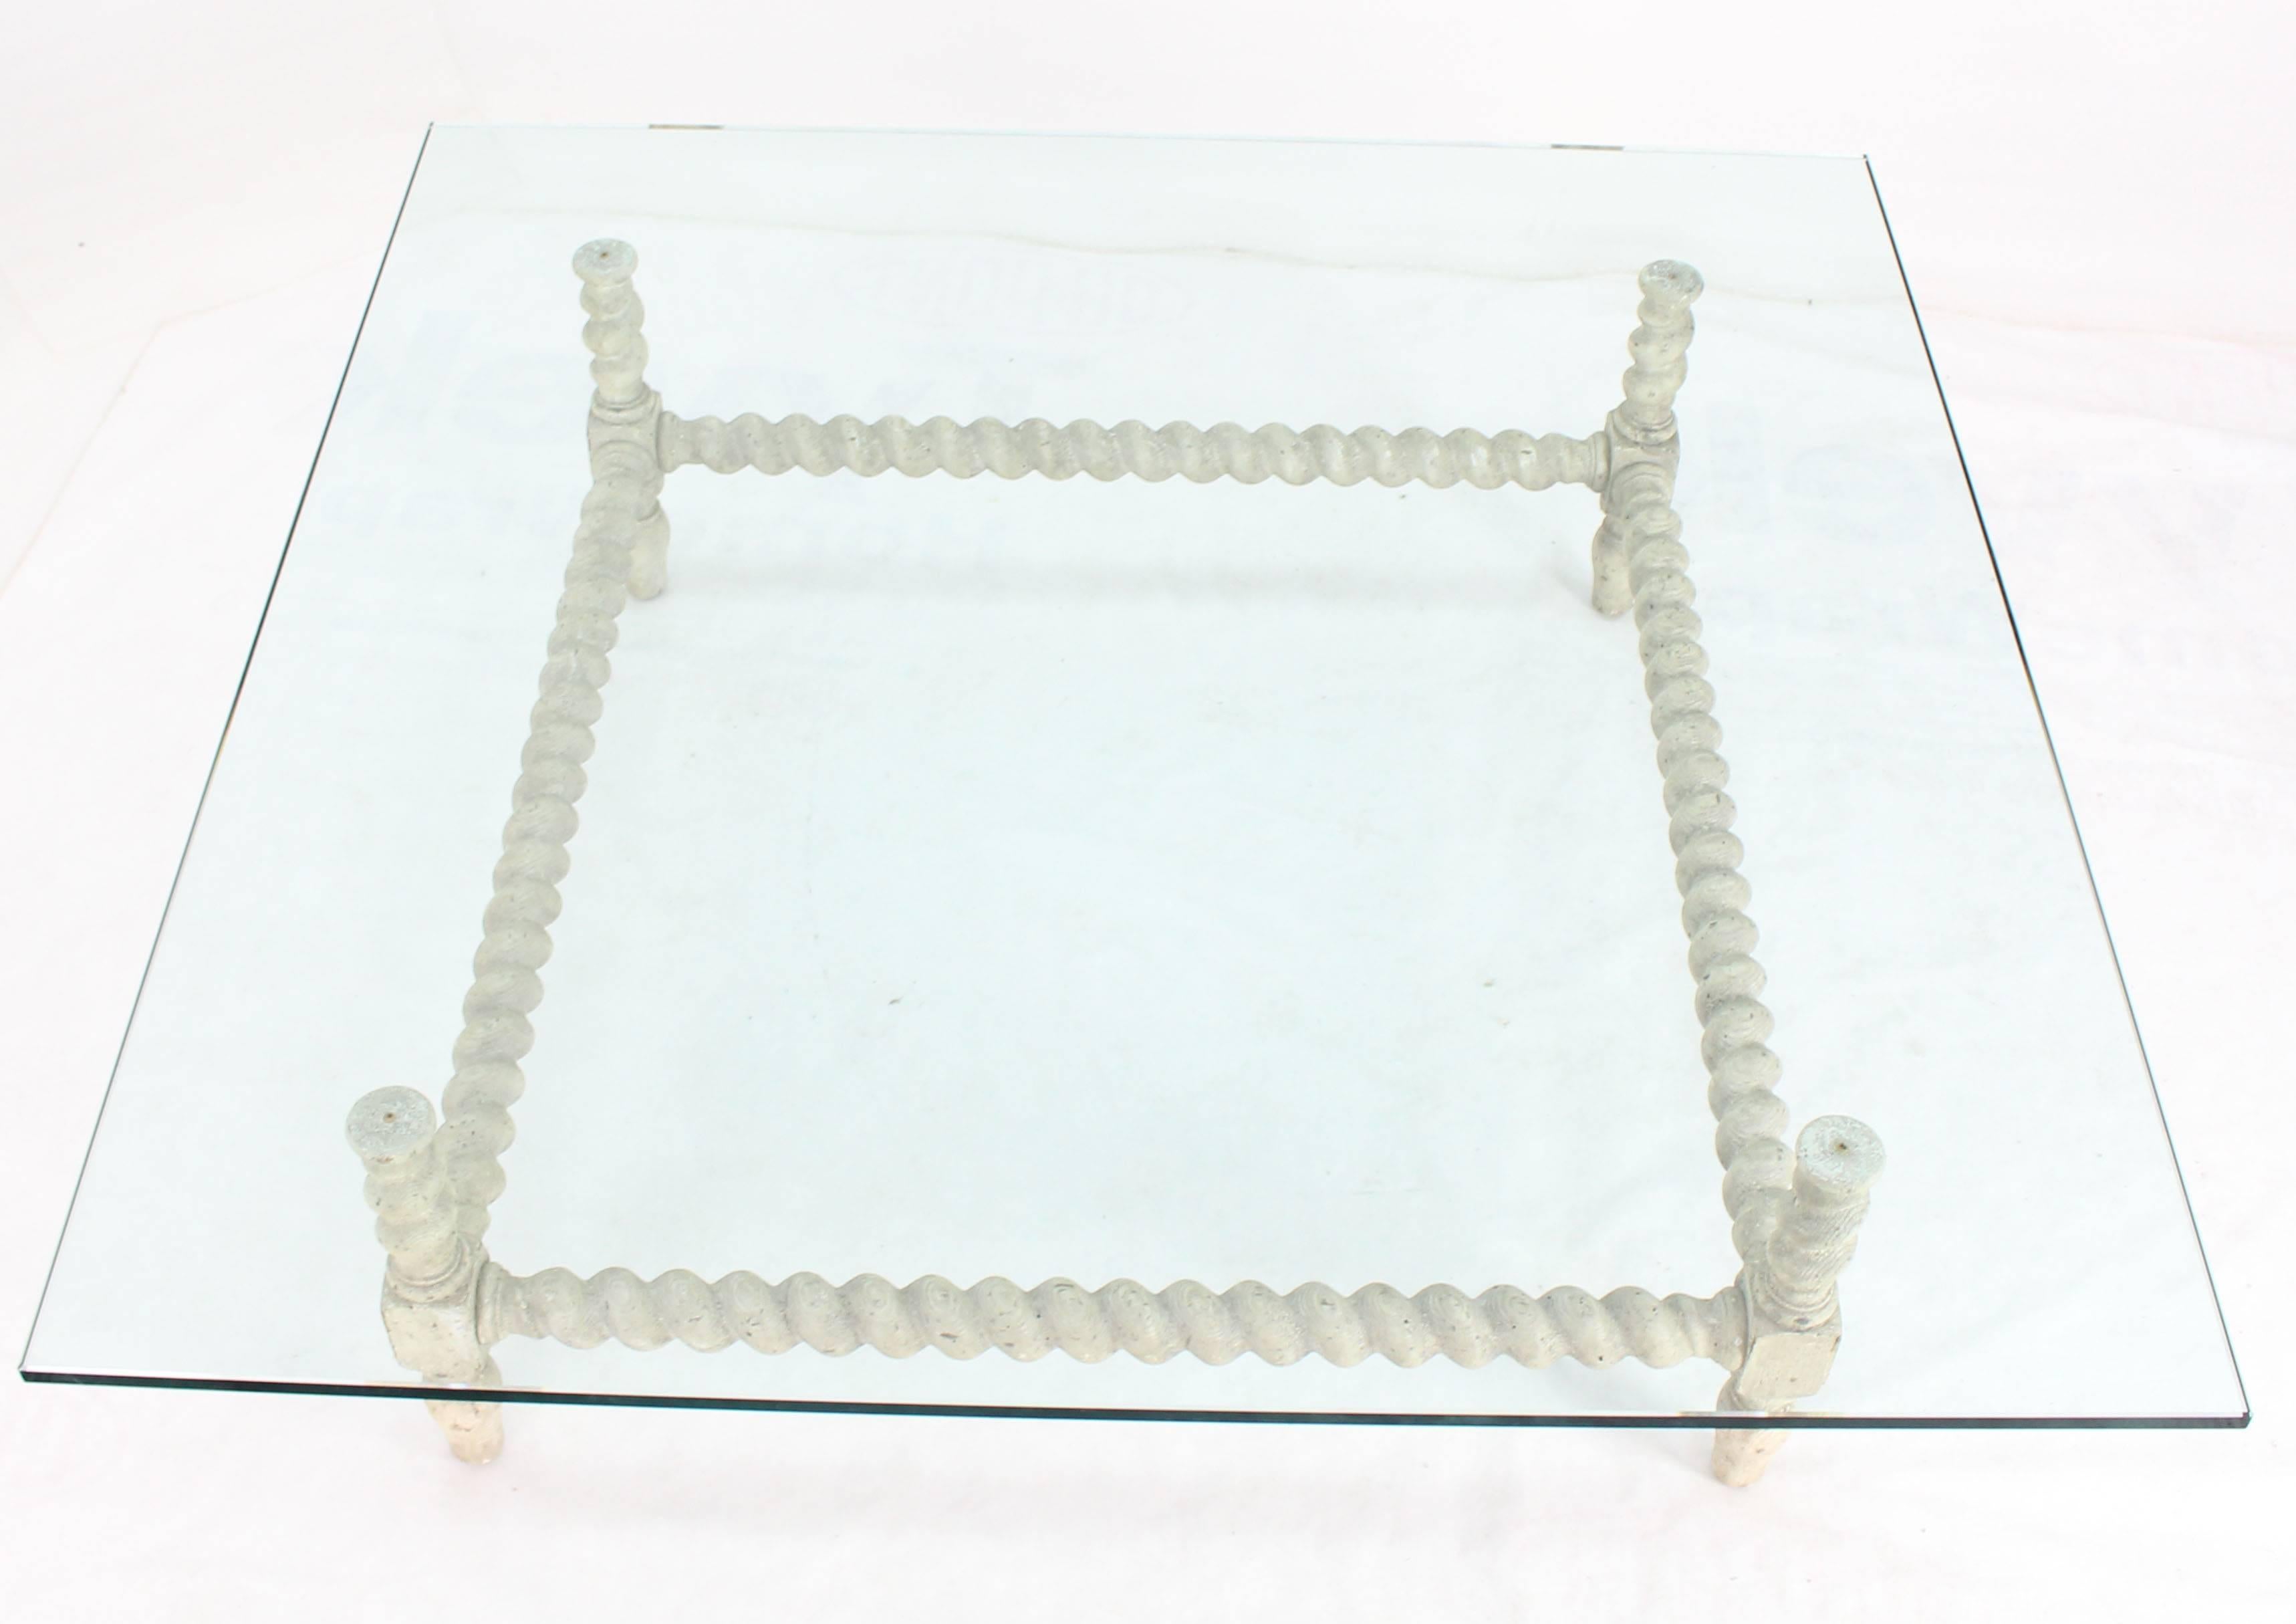 Carved wood in style of twisted rope painted white base measure: 54 x 54 glass top coffee table. 3/4